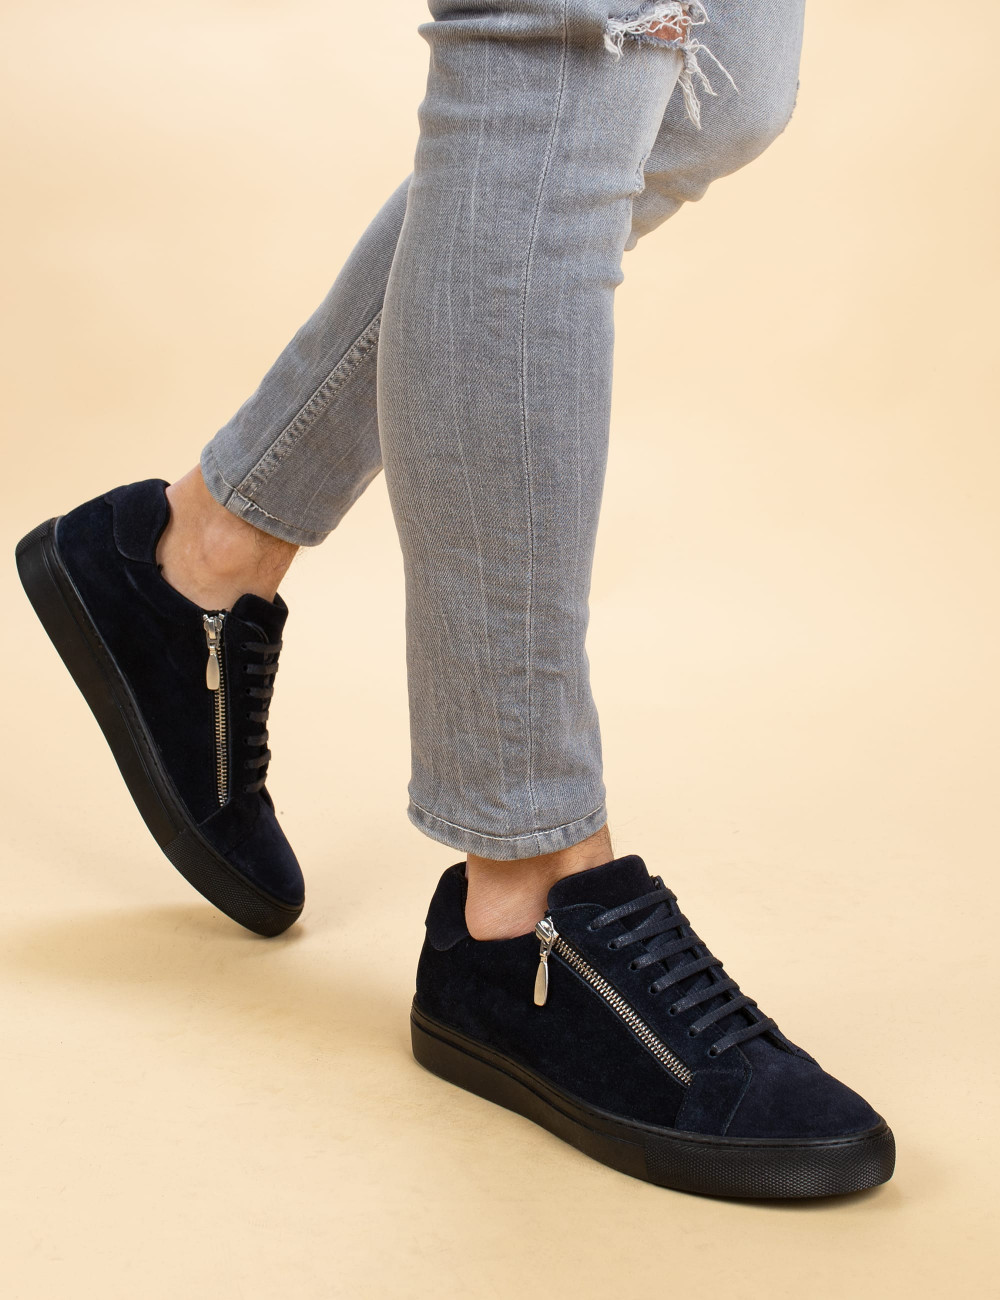 Navy Suede Leather Sneakers - 01741MLCVC01